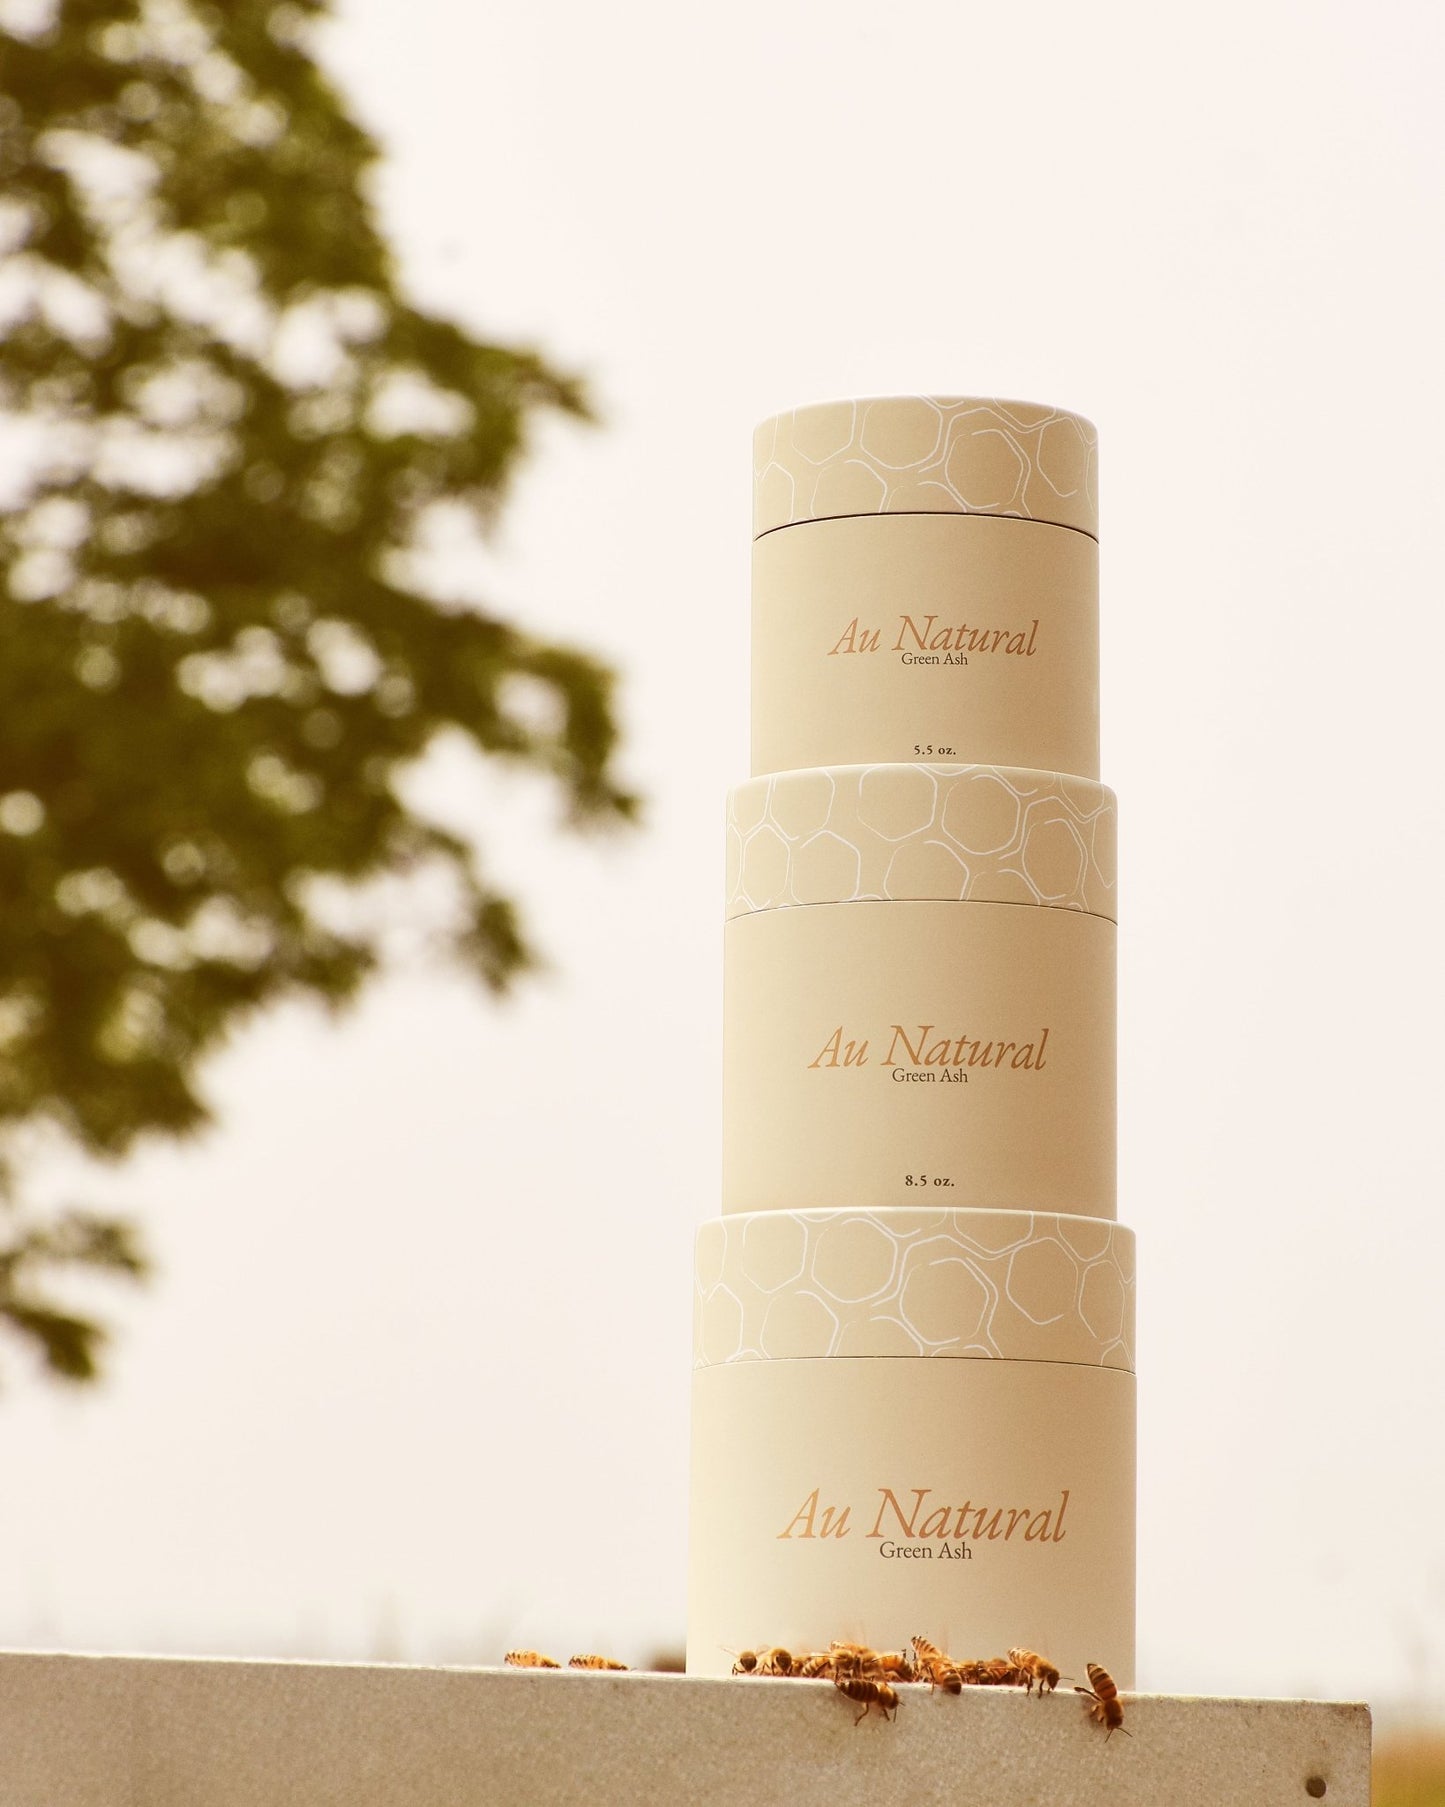 Au Natural - Green Ash Decor; all three sizes stacked